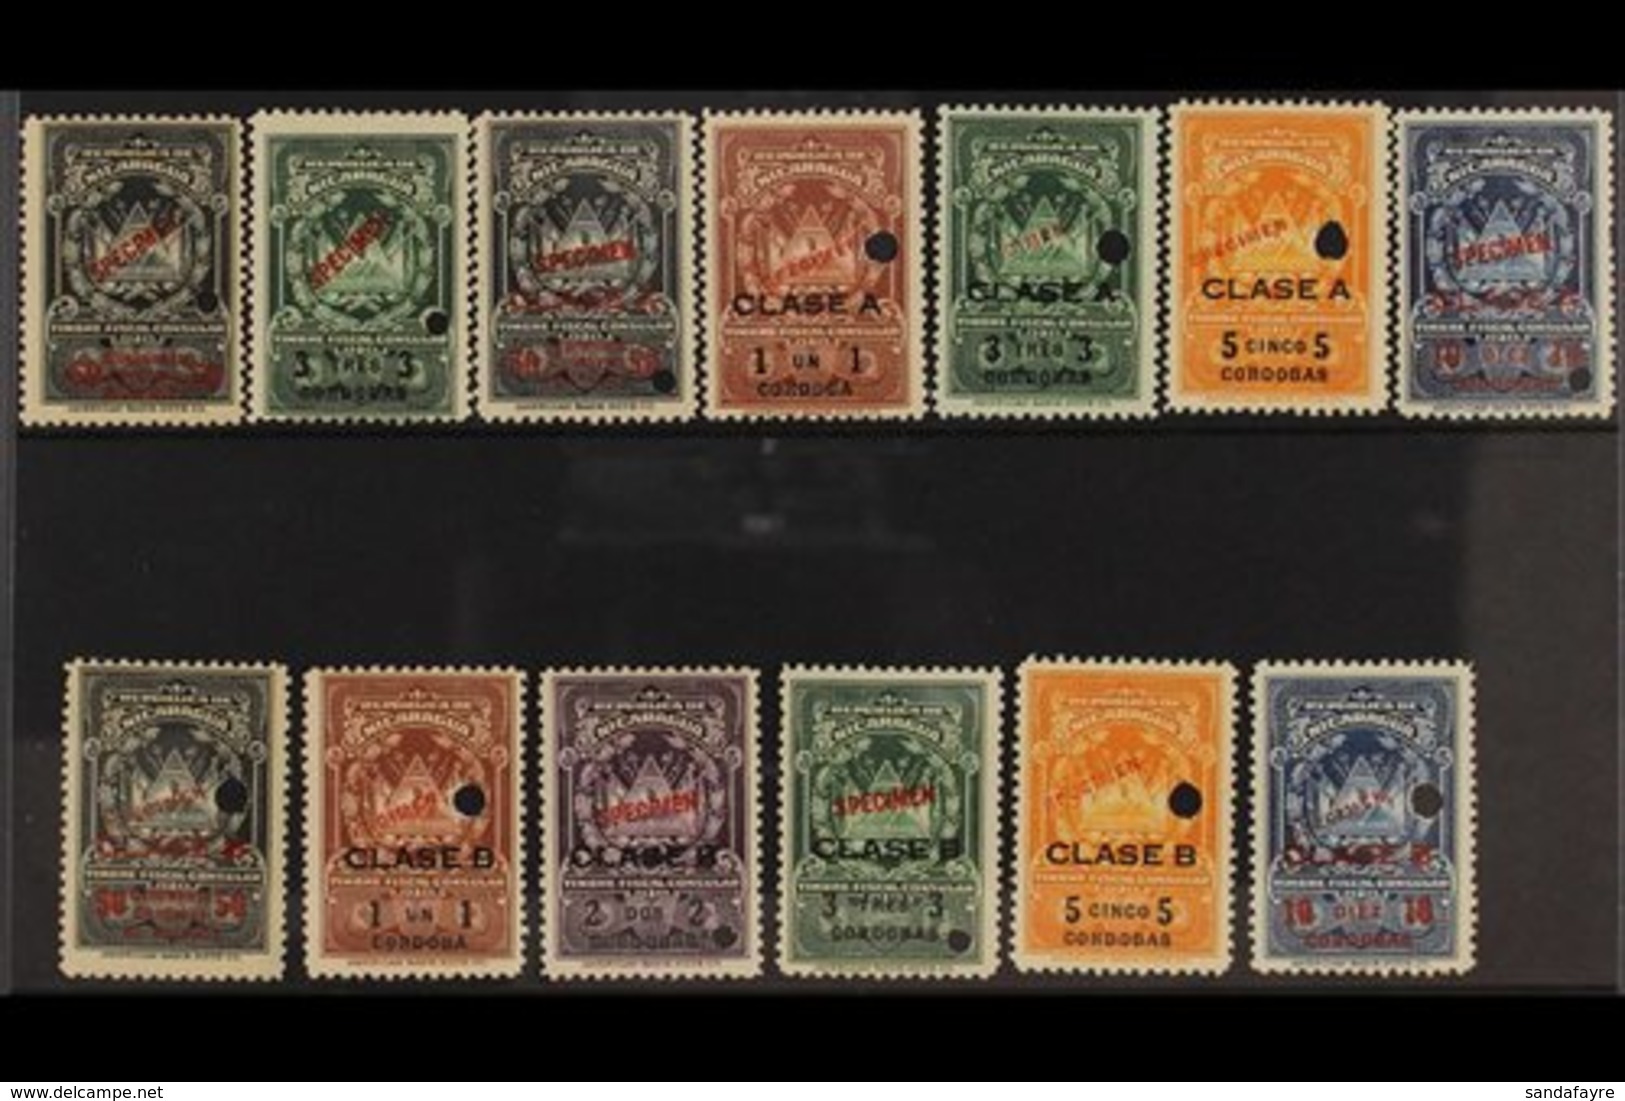 REVENUES TIMBRE FISCAL CONSULAR 1927-1945 Twenty Two Different Values, All With Red "SPECIMEN" Overprints, Small Securit - Nicaragua